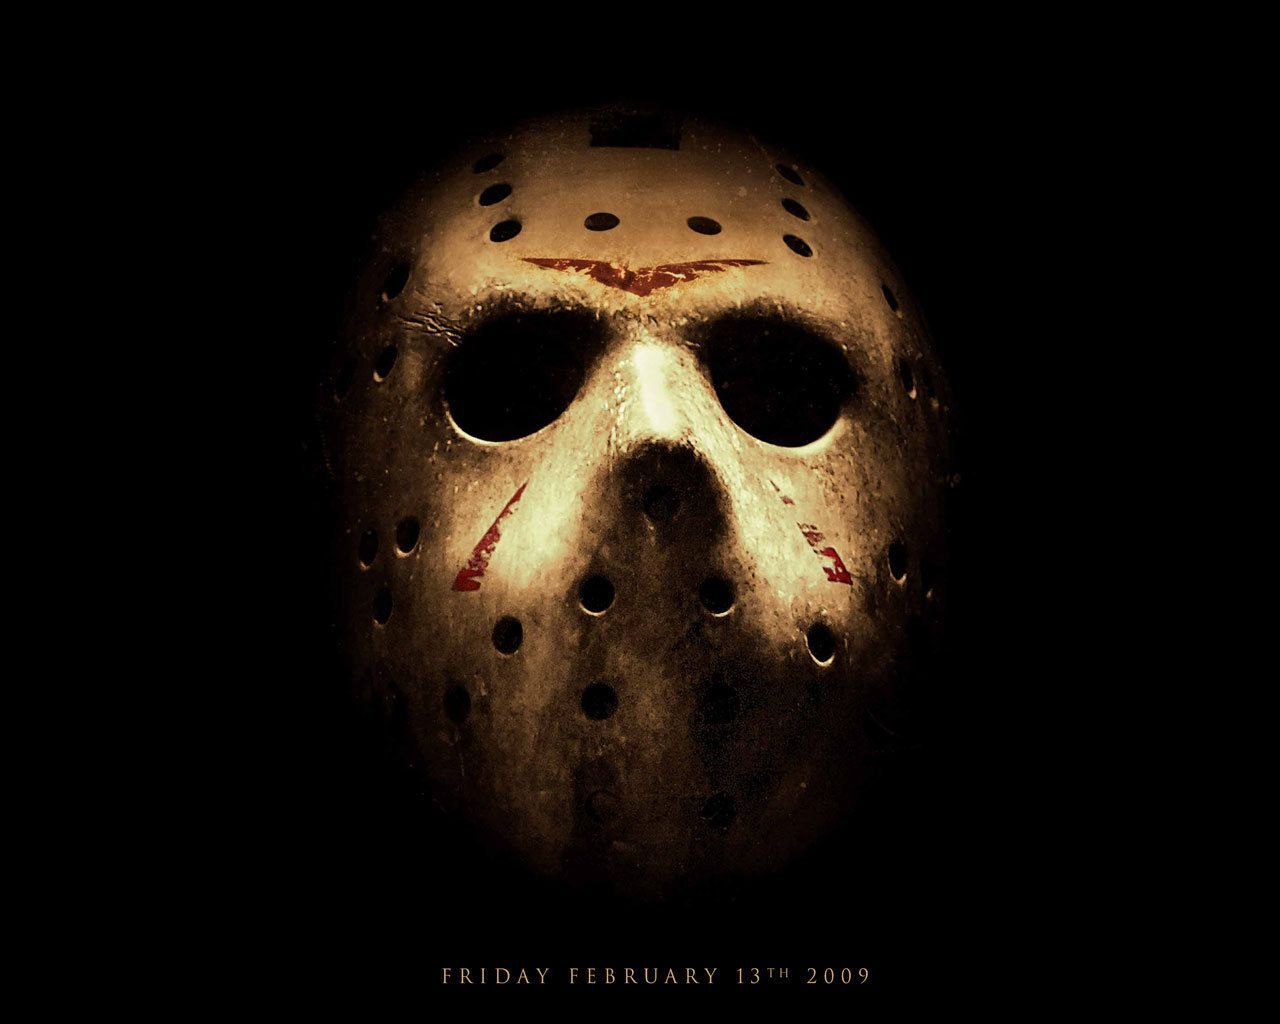 Friday The 13th Wallpaper (High Quality) HD Wallpaper. Horror movie posters, Scary movies, Horror